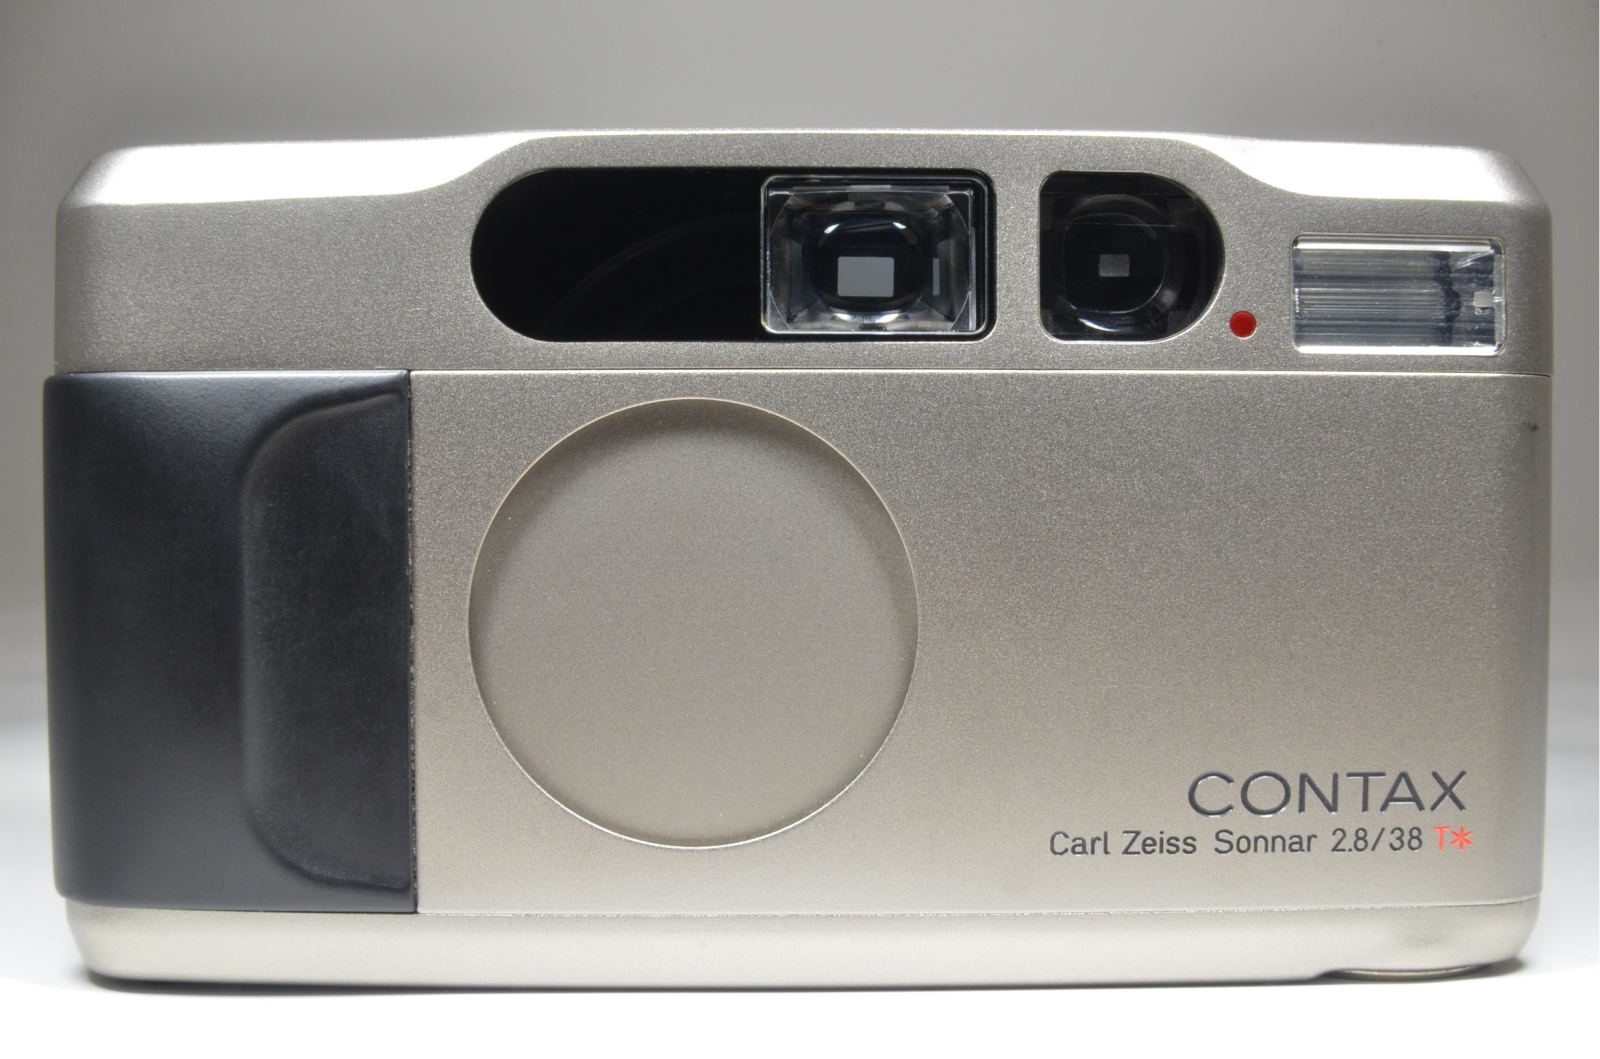 contax t2 data back point & shoot 35mm film camera full leather case